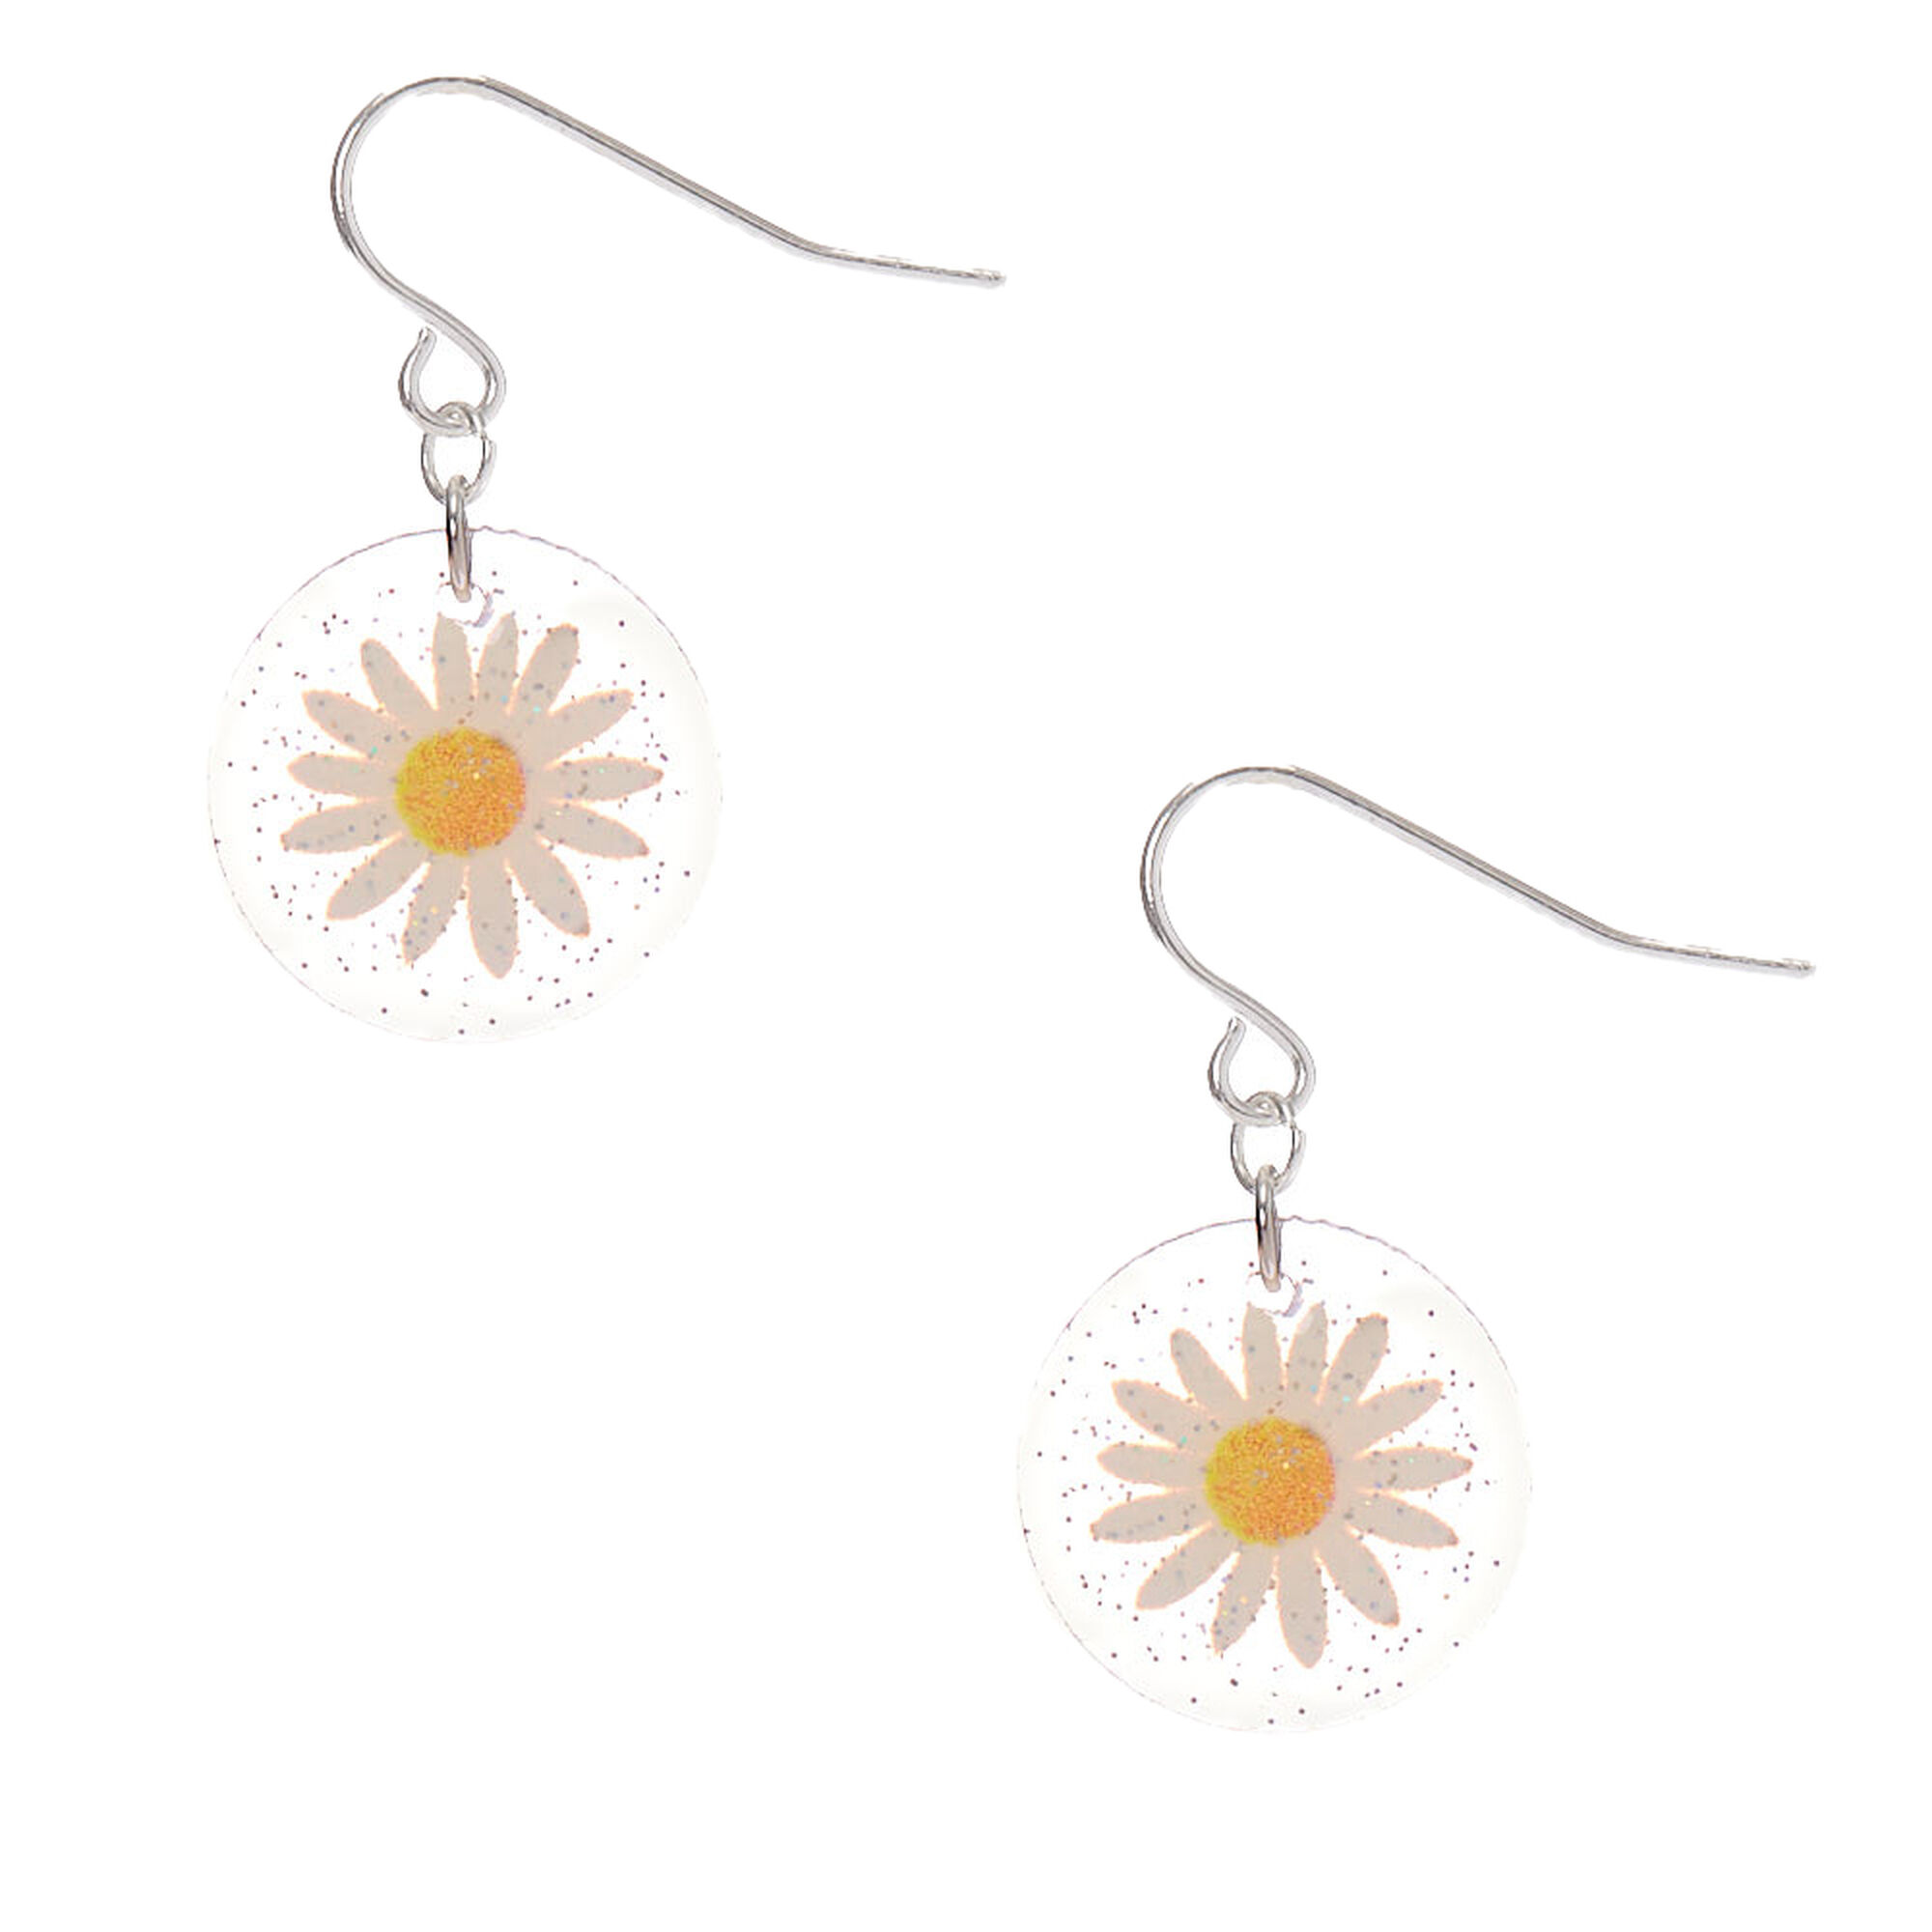 View Claires SilverTone 1 Glitter Pressed Daisy Drop Earrings White information